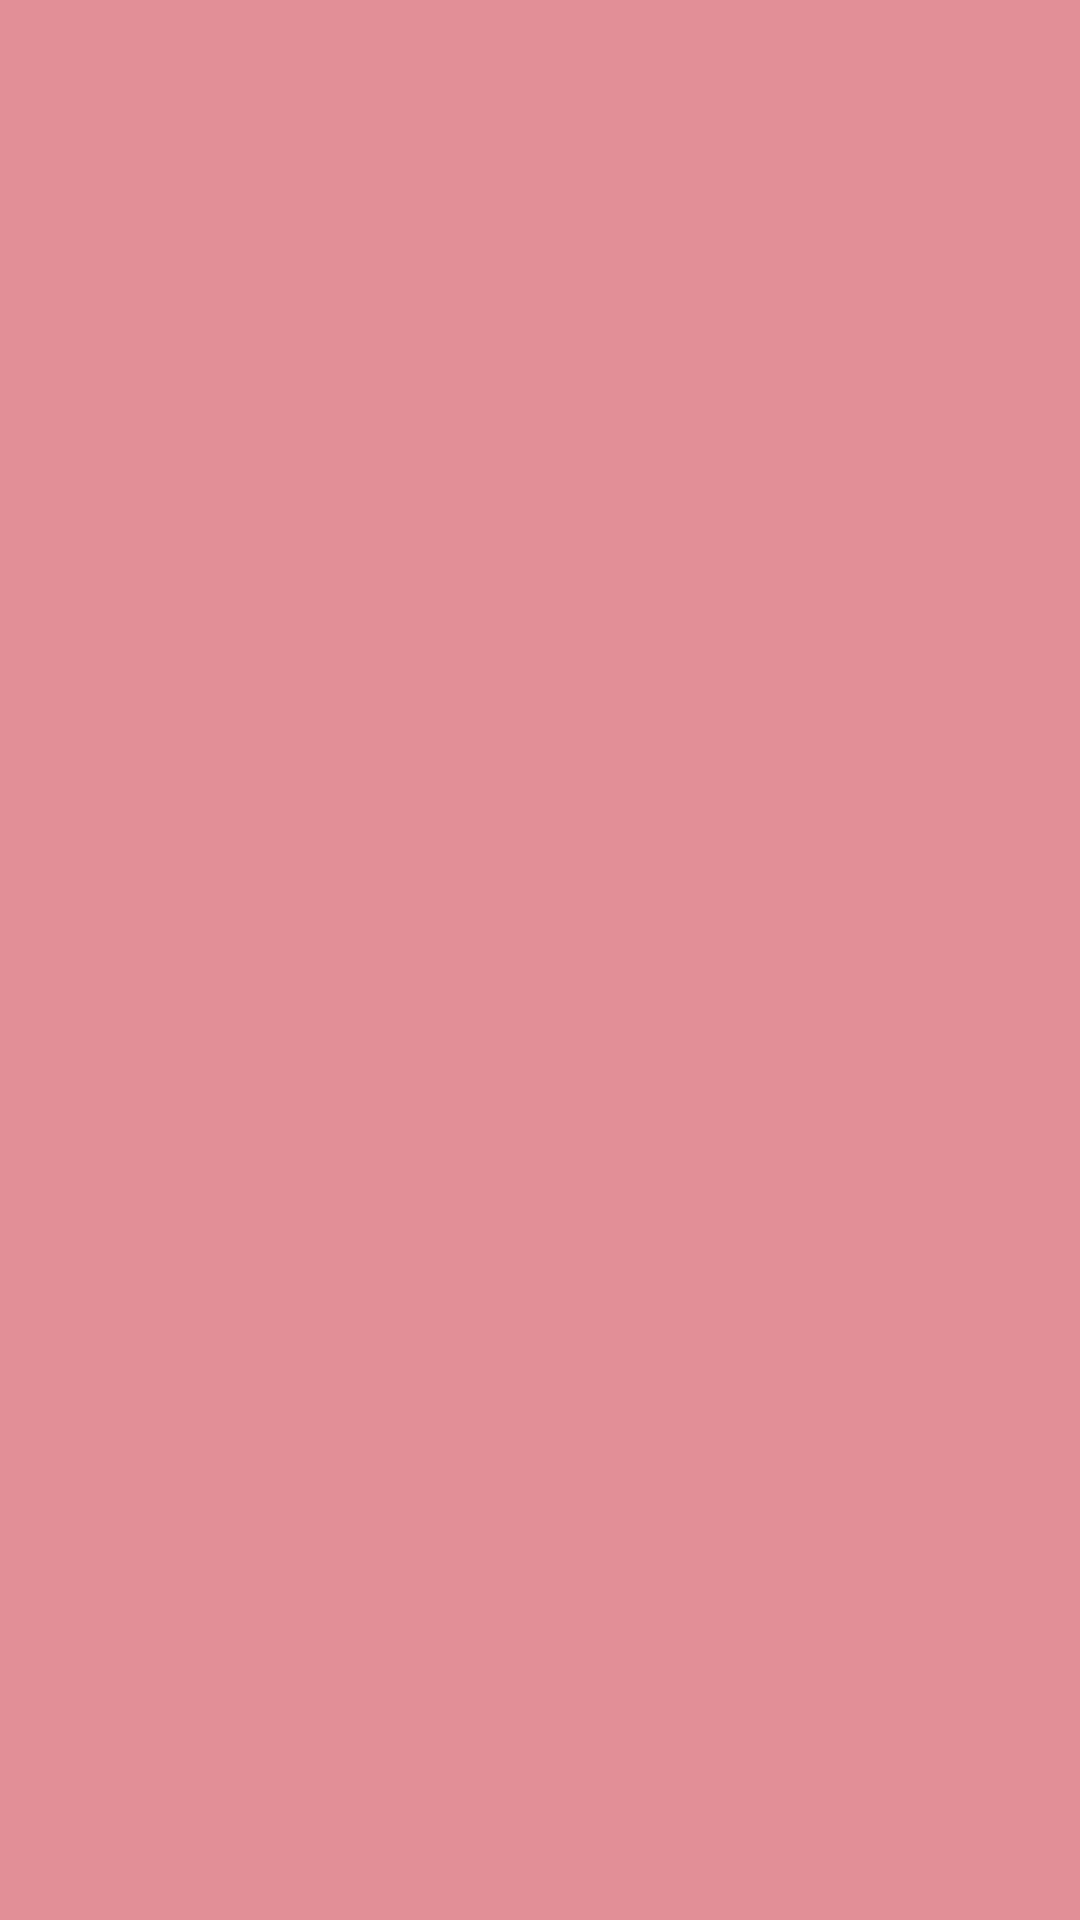 1080x1920 Ruddy Pink Solid Color Background